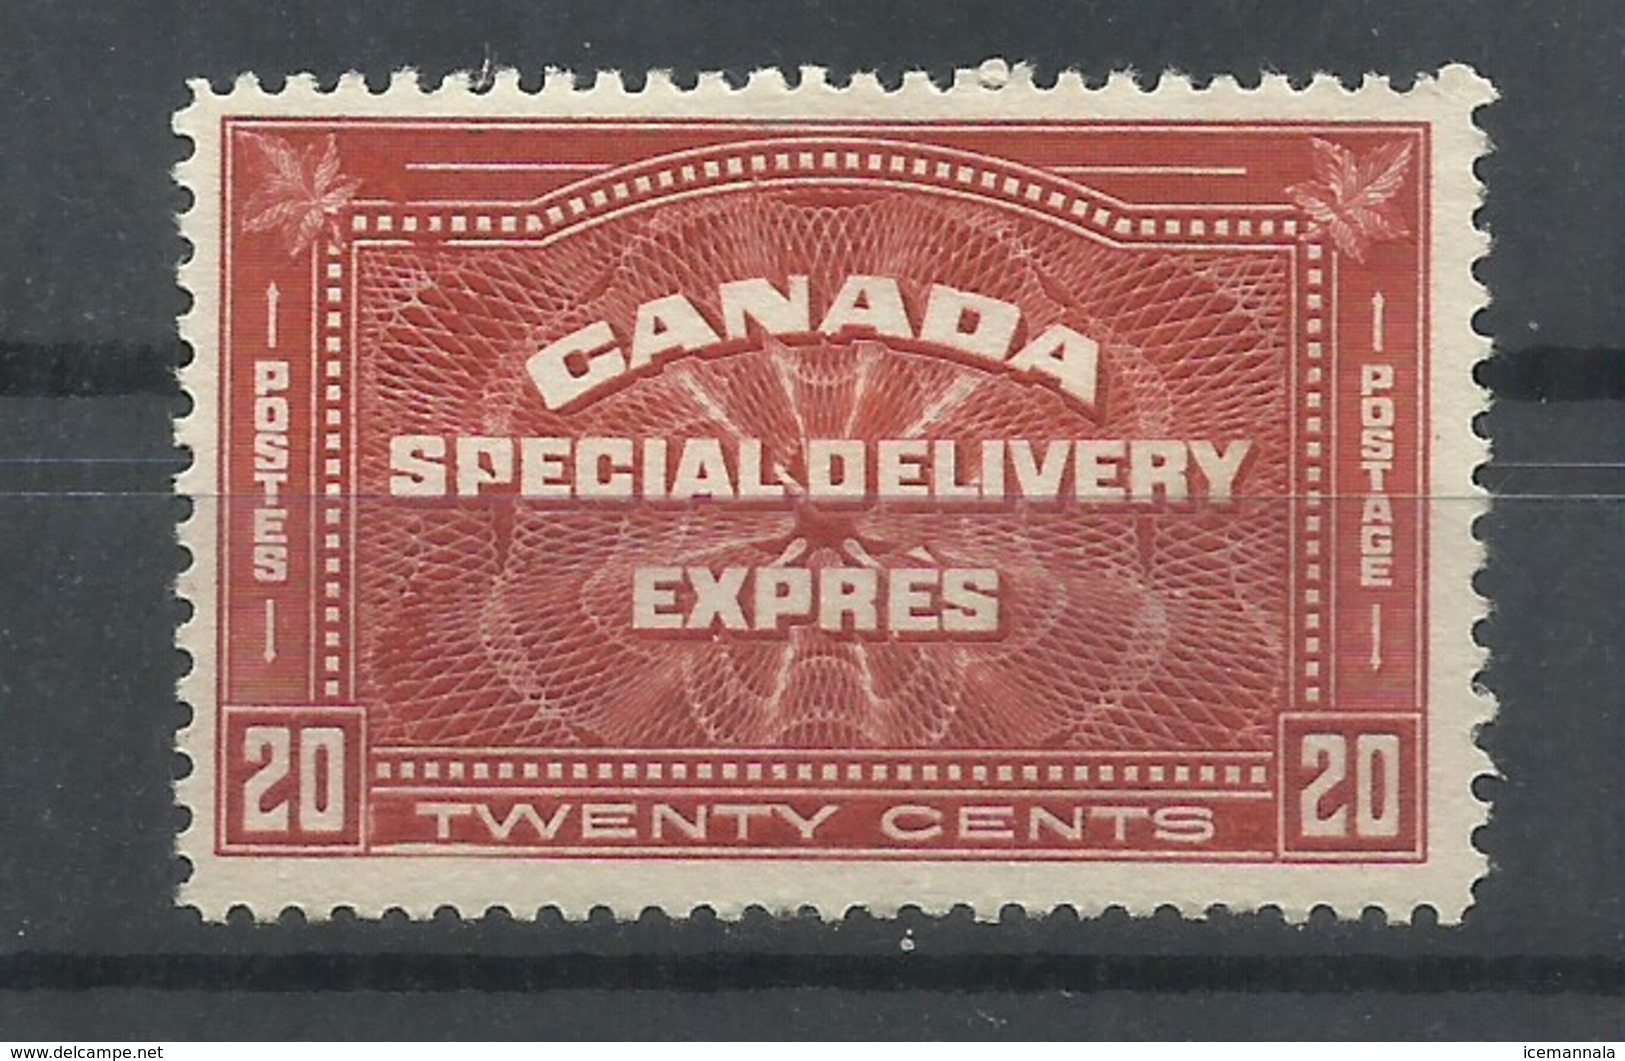 CANADA   YVERT  EXPRES   4   (*)  (SIN GOMA) - Exprès